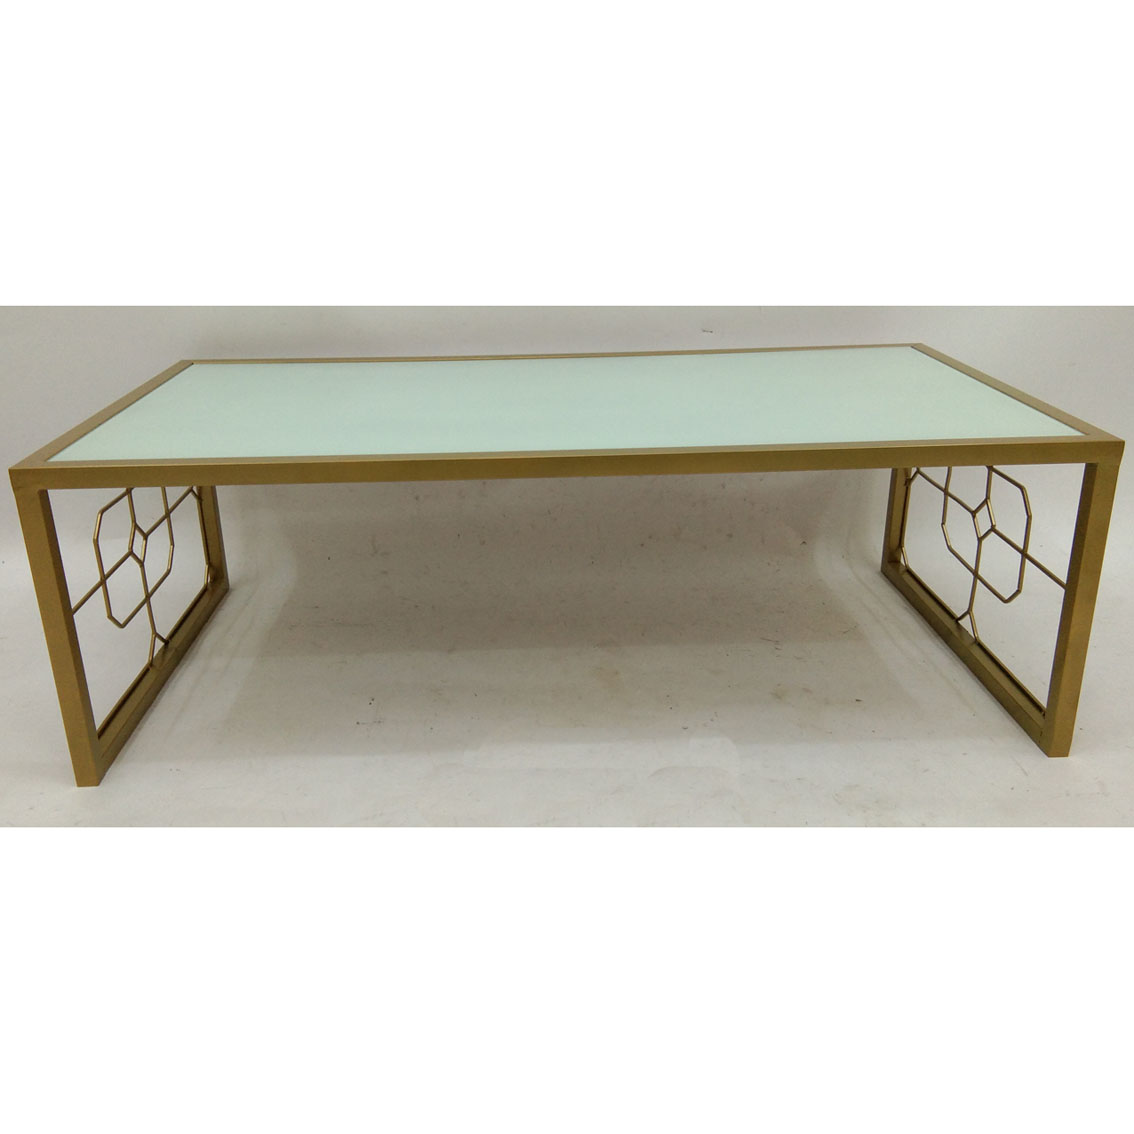 Gold rectangular metal coffee table with white glass top and geometric metal side decor